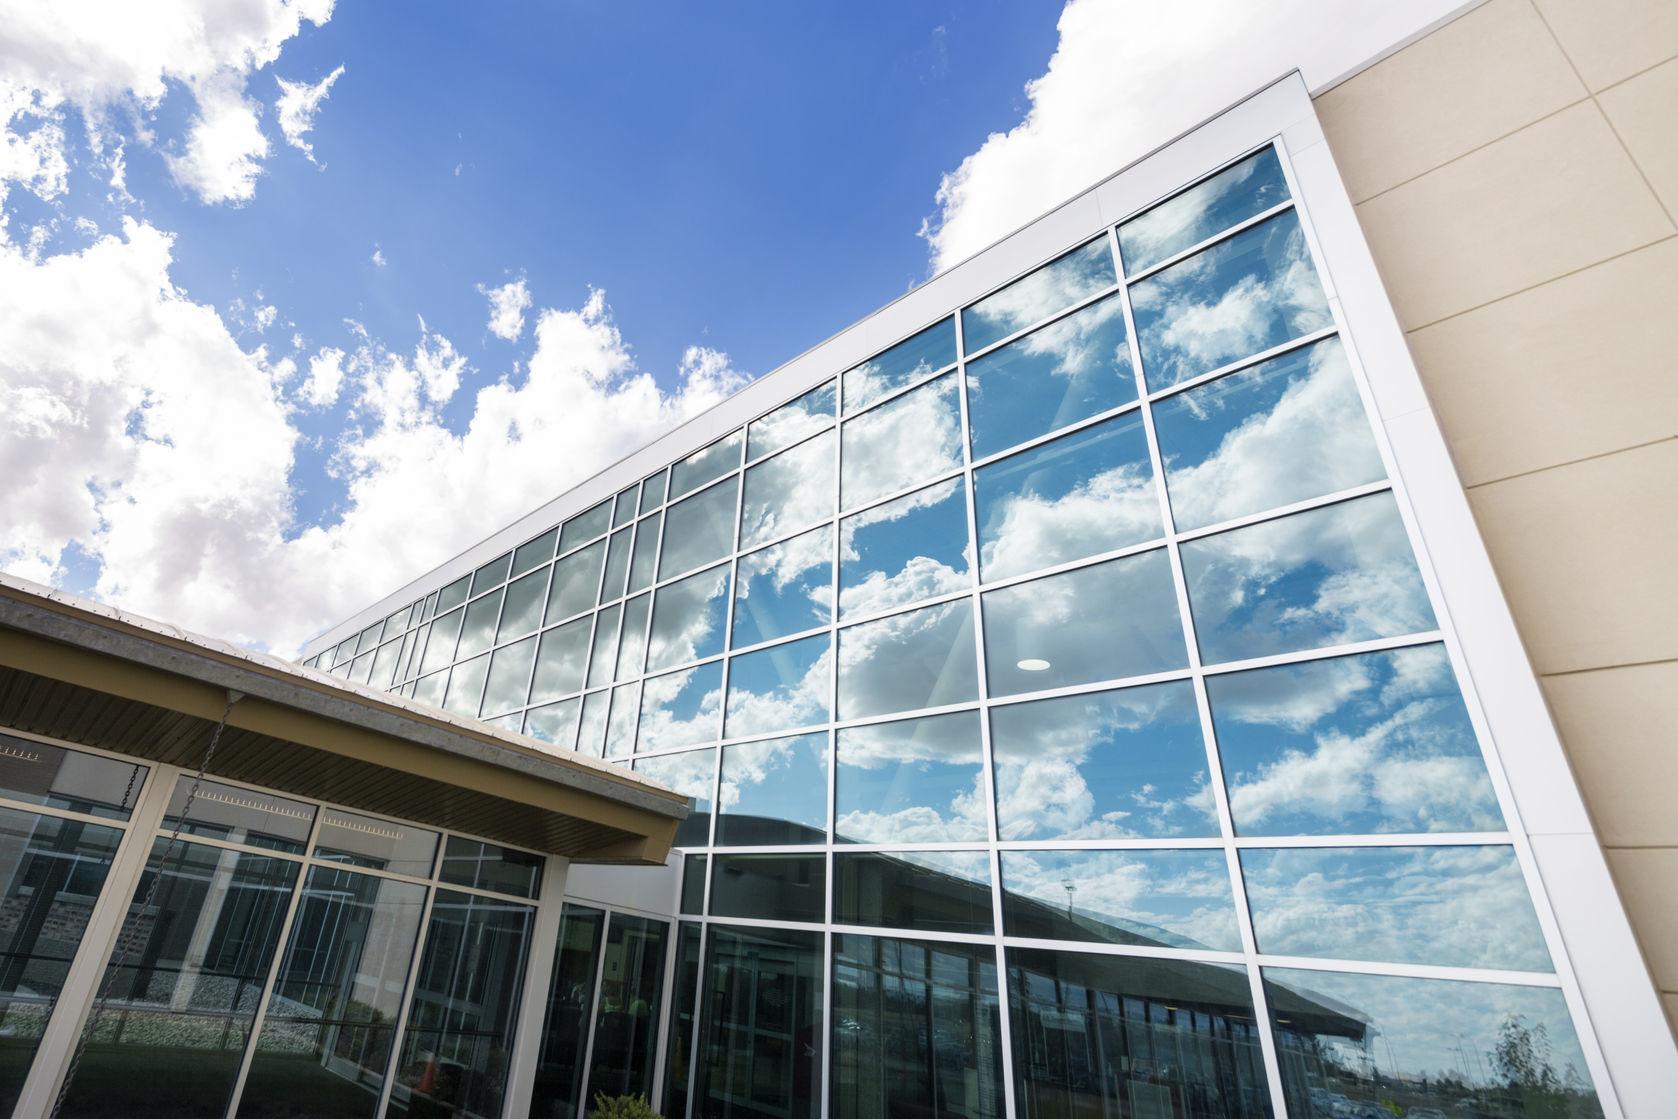 Low angle view of modern hospital building with reflection of clouds on glass windows